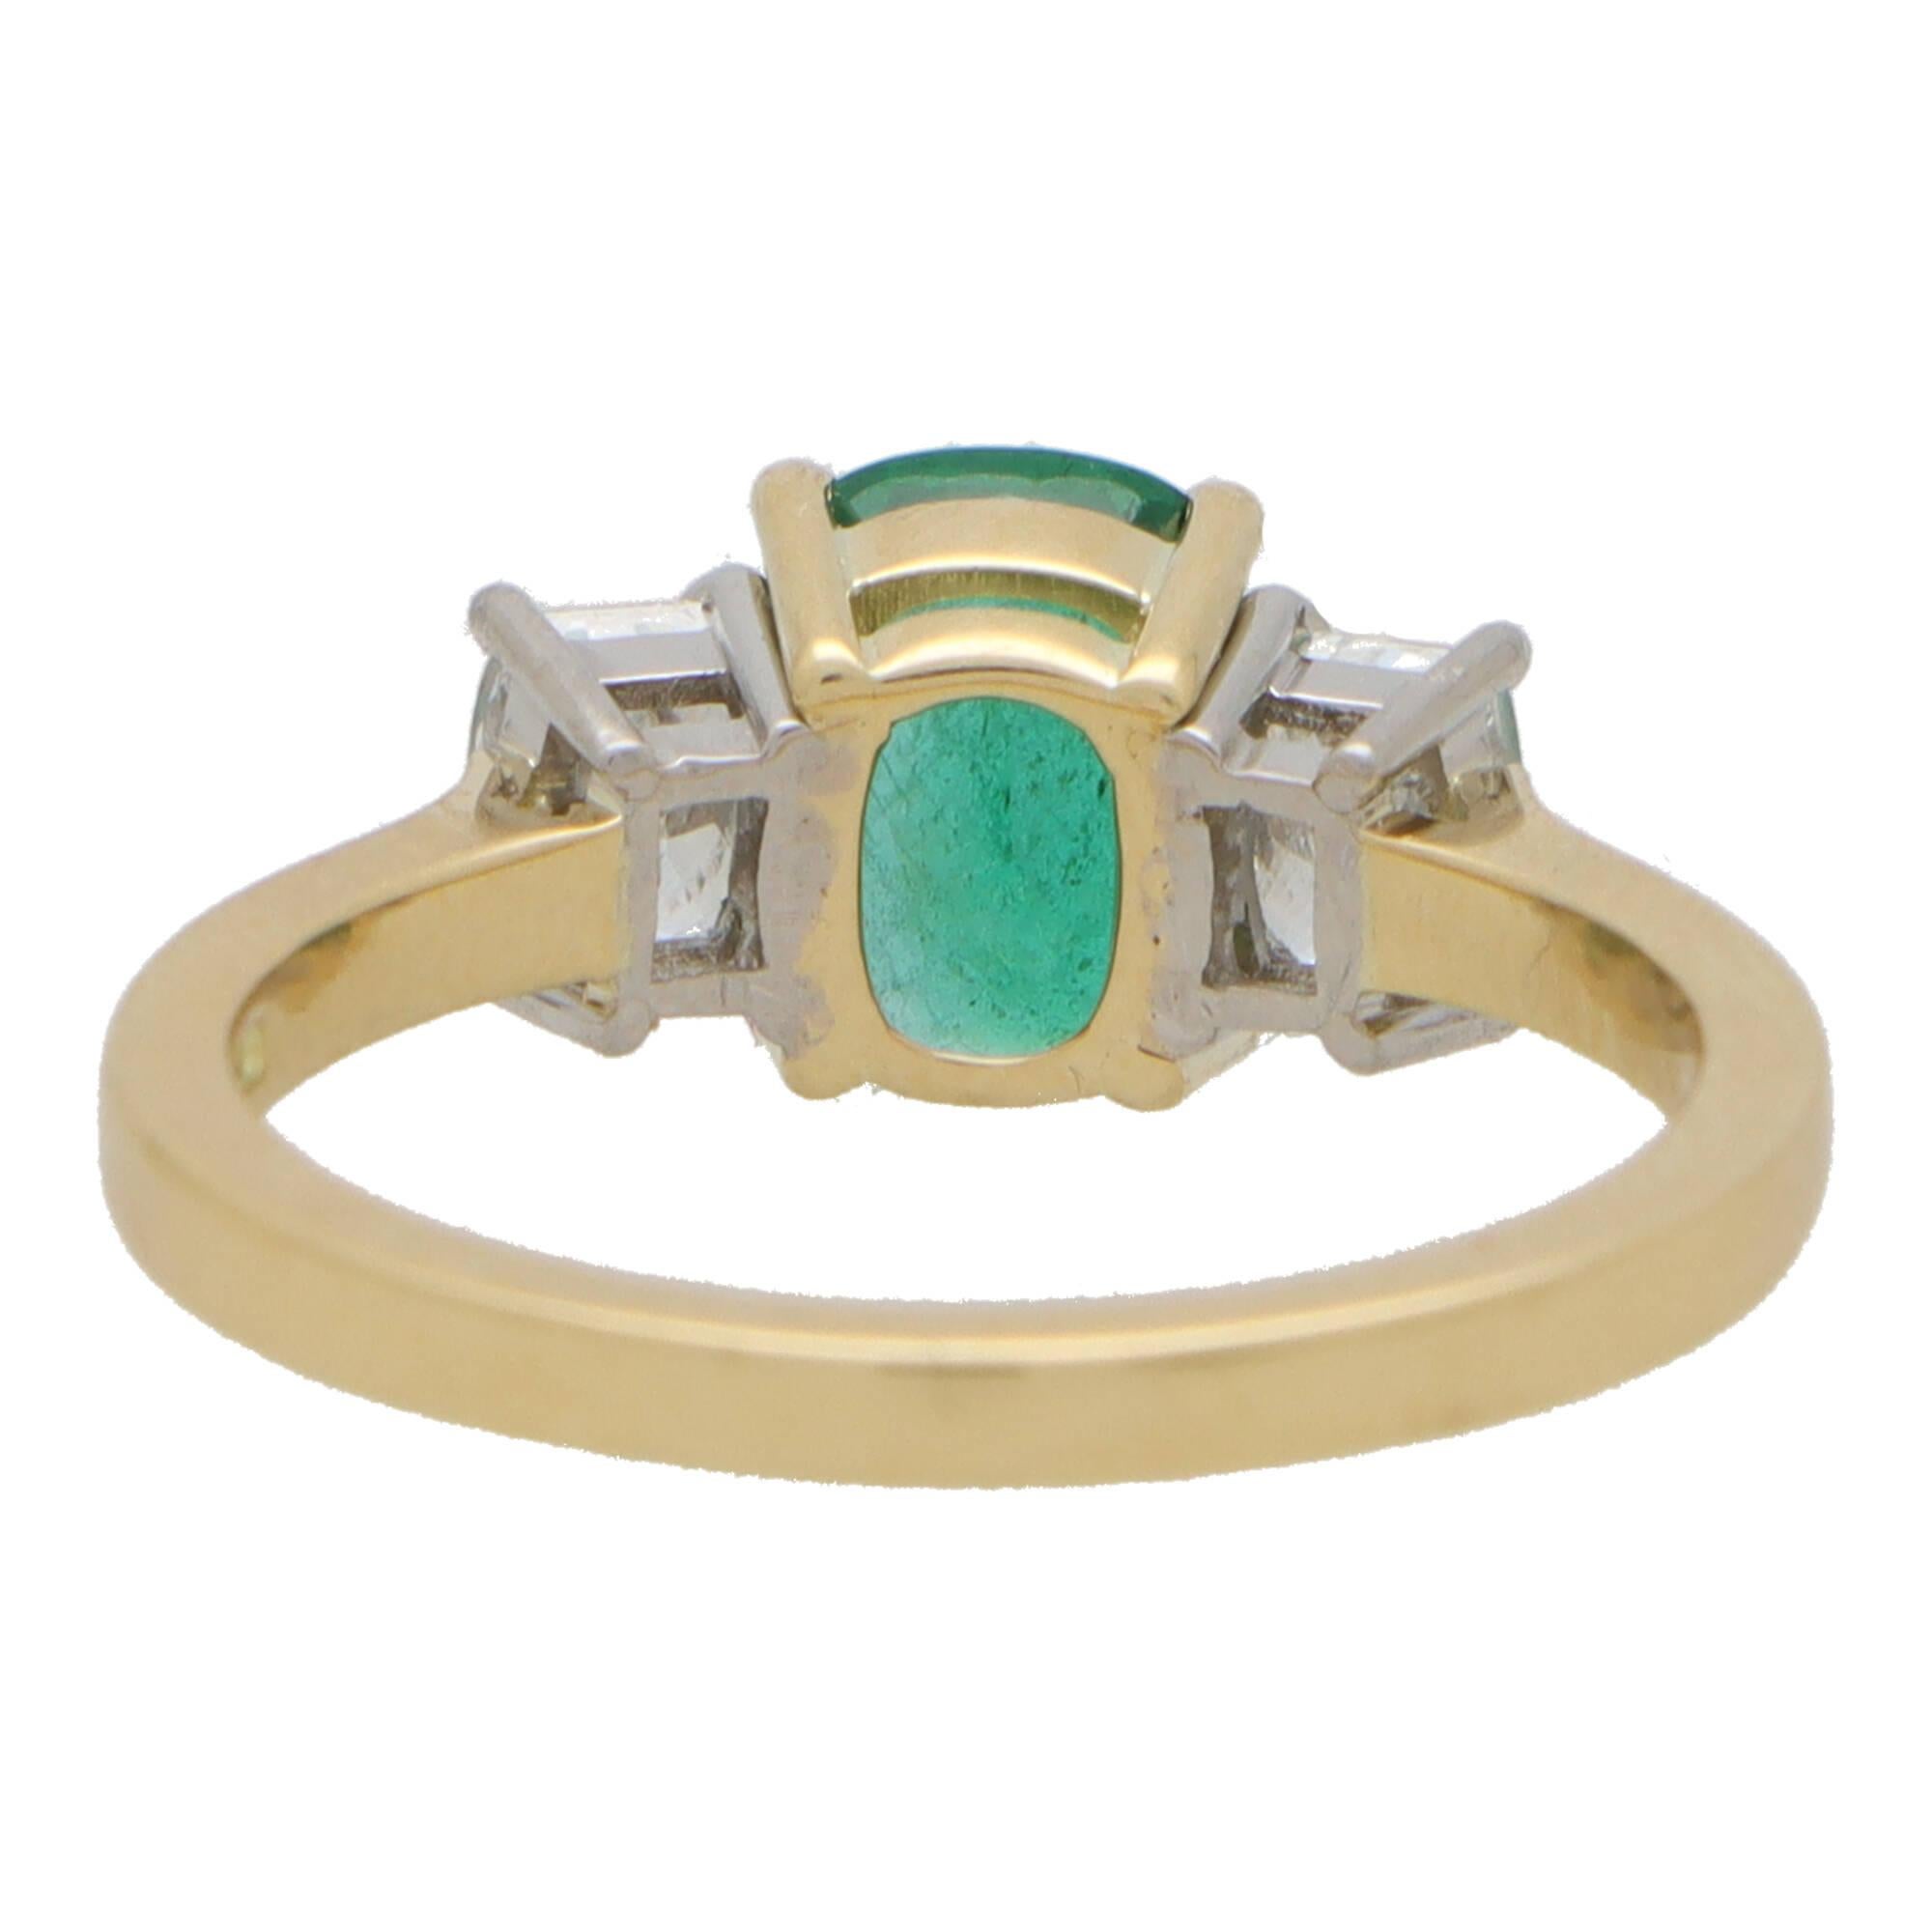 Women's or Men's Contemporary Cushion Cut Emerald and Diamond Three Stone Ring in 18k Gold